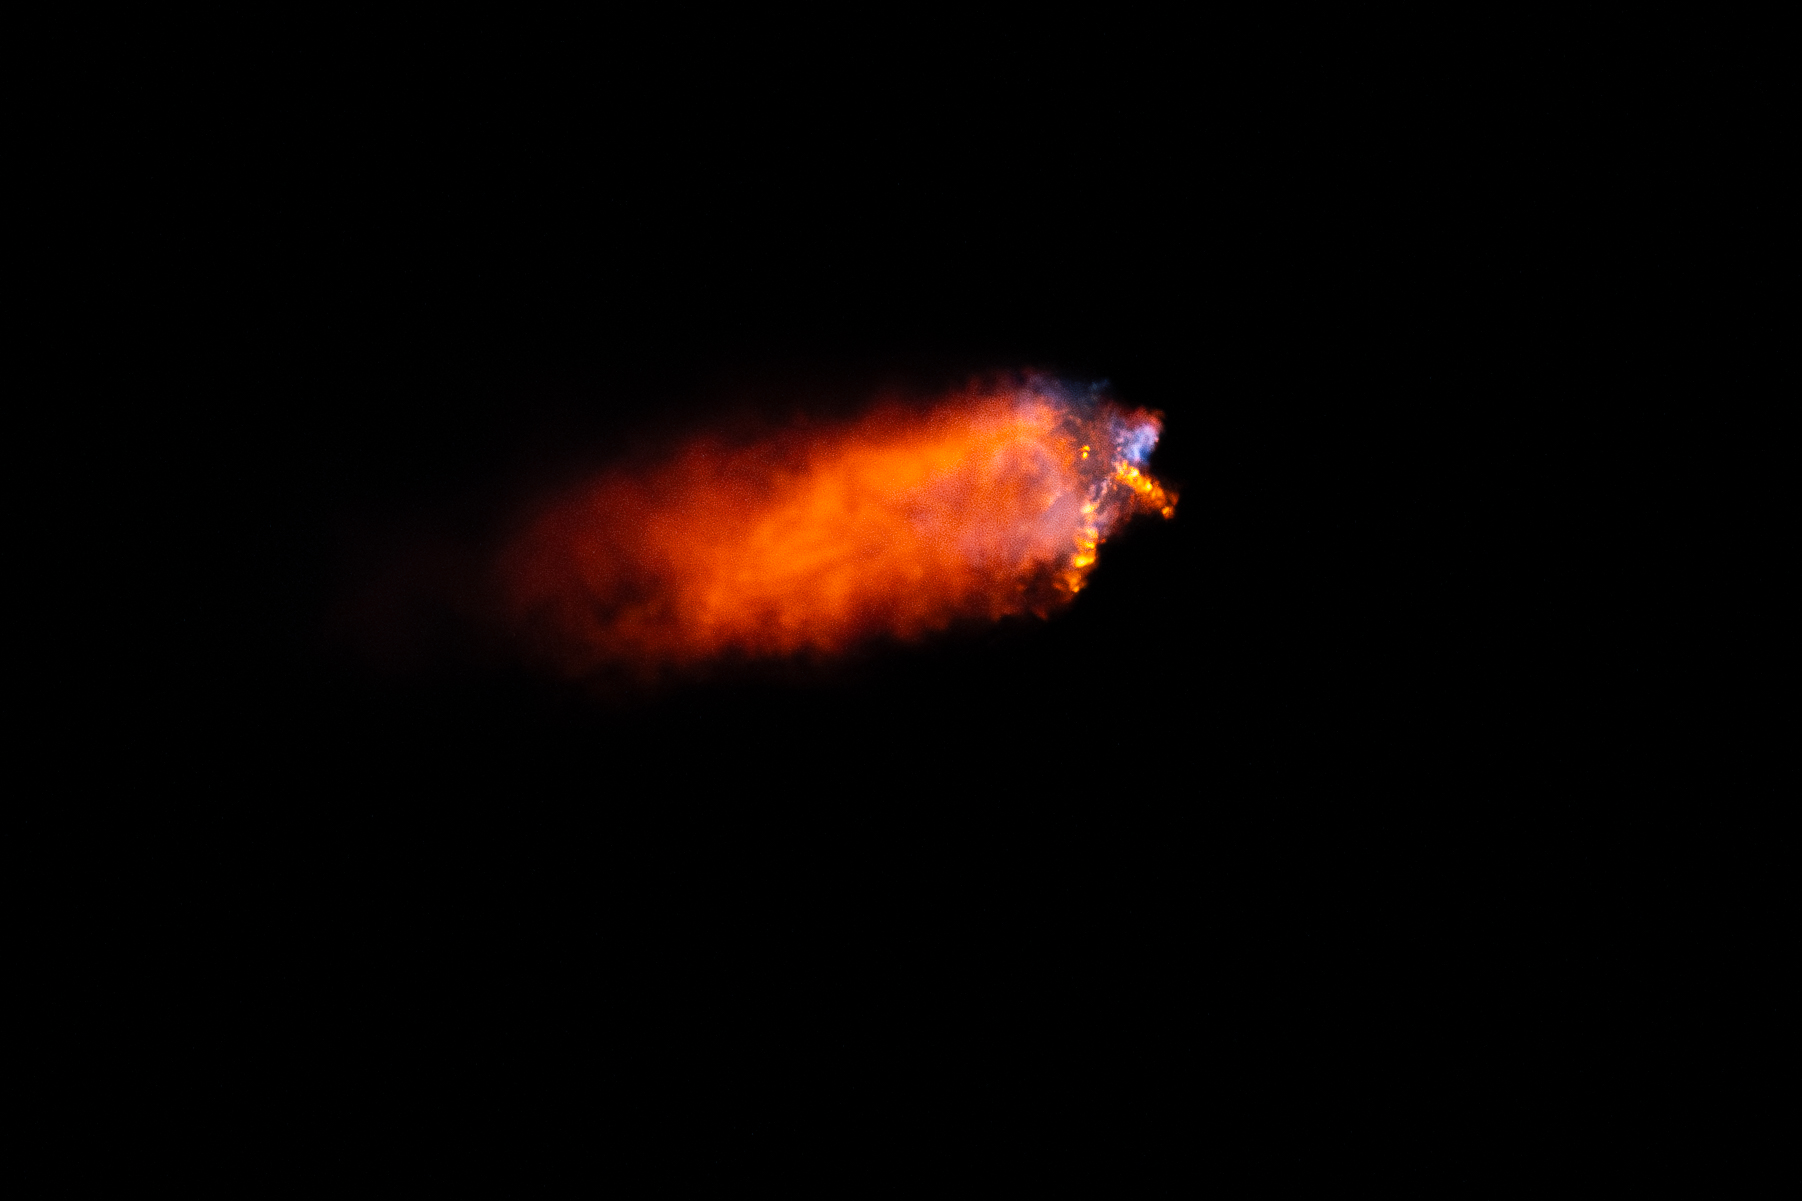 A rocket launches into the night, leaving behind a bright column of fire